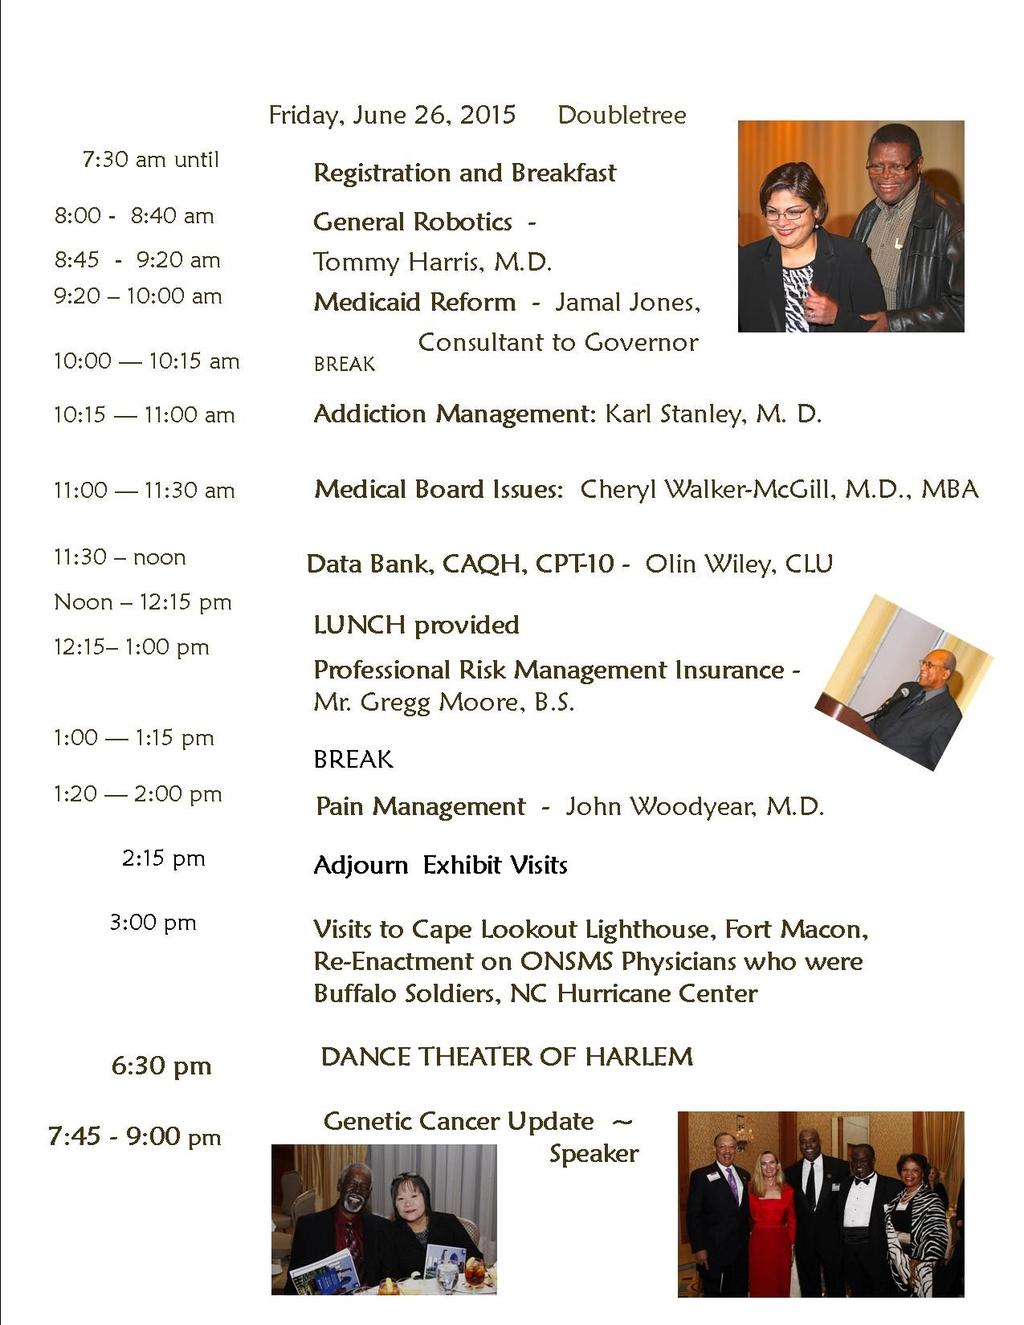 9 7:00 am - -until Exhibits 8:00-8:40 am 8:45-9:20 am Senior Healthcare Analyst, NC Department of Healthcare and Human Services 9:20-10:00 am 10:00-10:25 am 10:30-11:00 am 11:00-11:55 am Exhibit